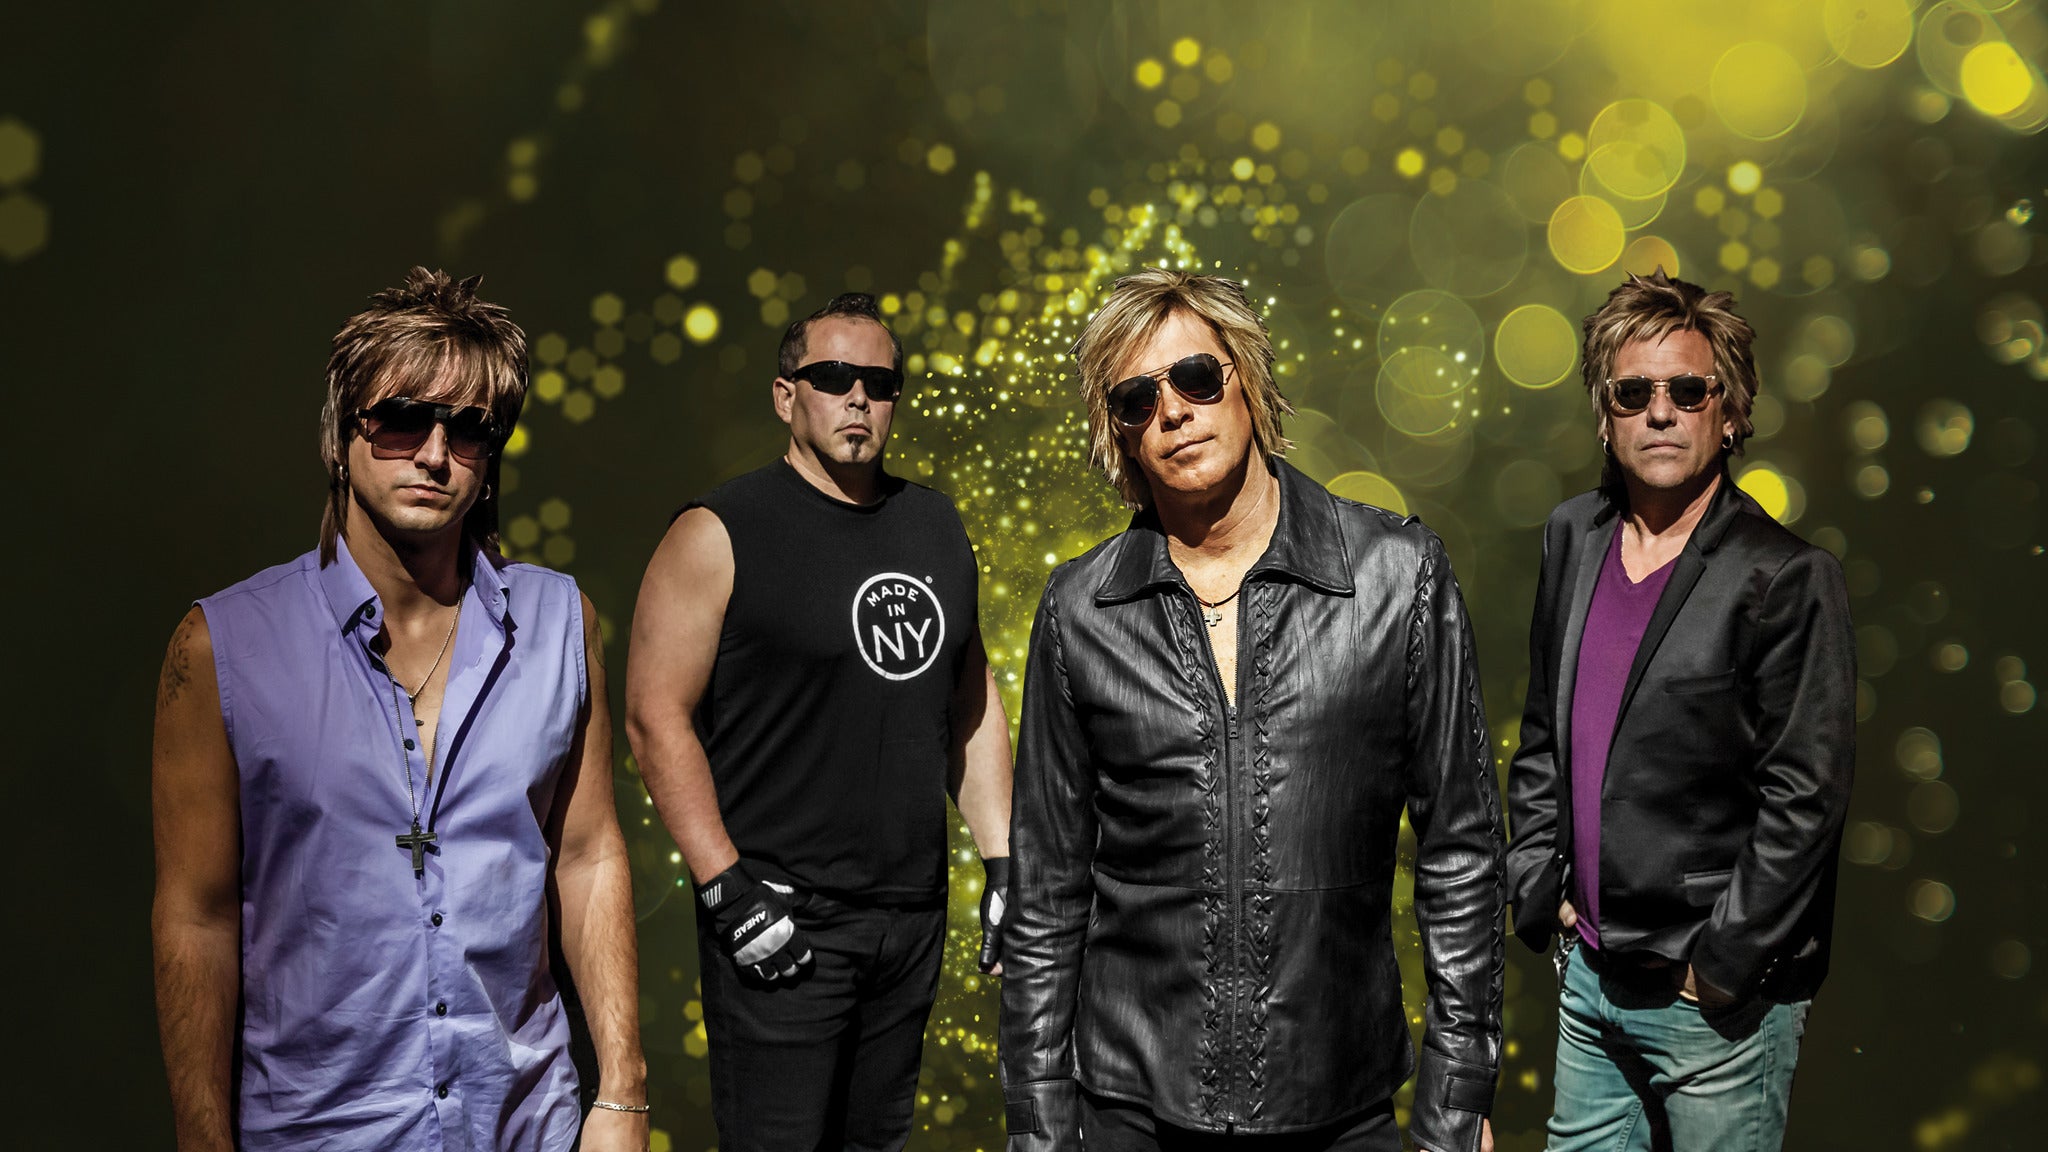 Slippery When Wet in Orlando promo photo for Official Platinum presale offer code